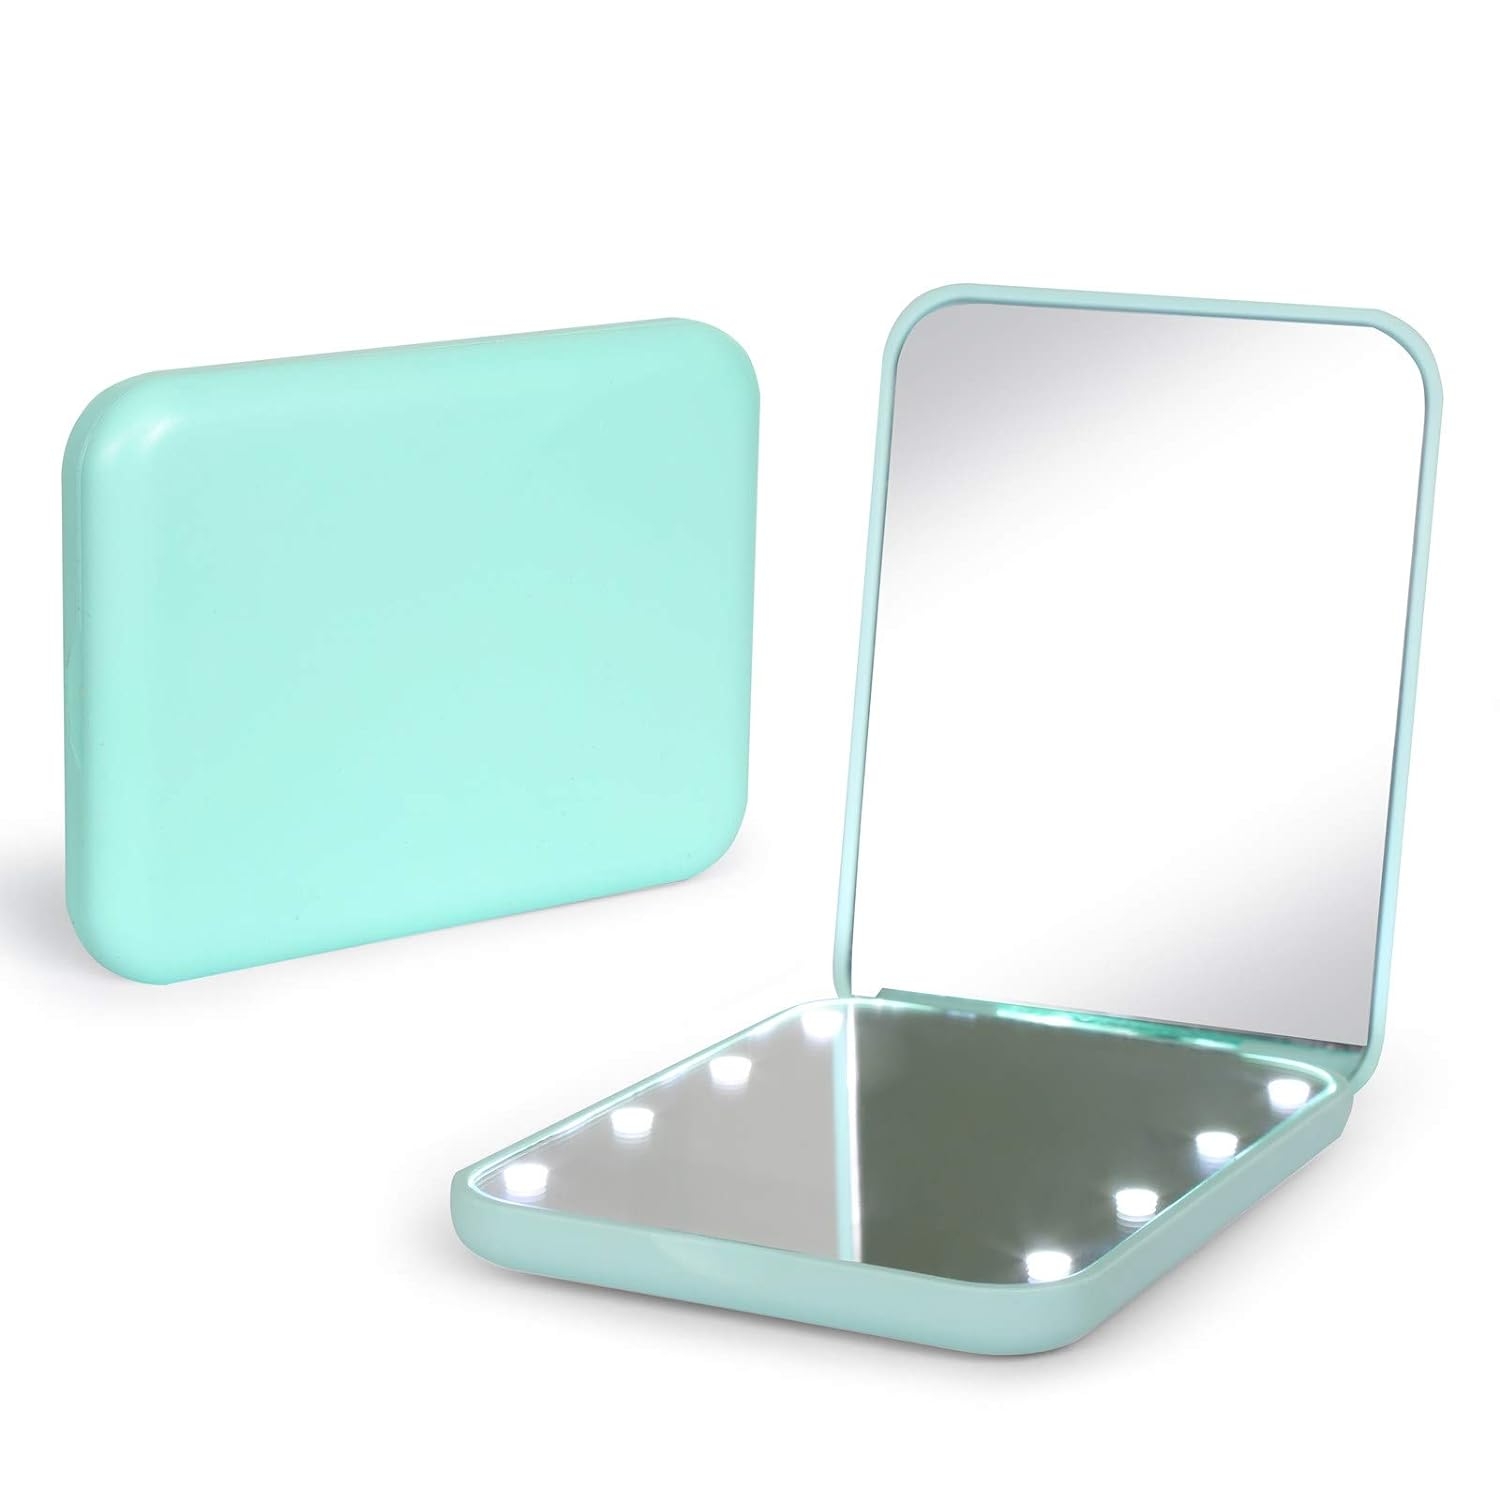 Kintion Compact Mirror with Light,LED Compact Travel Makeup Mirror,1X/3X Magnification Lighted Pocket Mirror,Double Sided,Distortion Free,Portable,Folding,Handheld,Small Compact Mirror for Purses,Gift